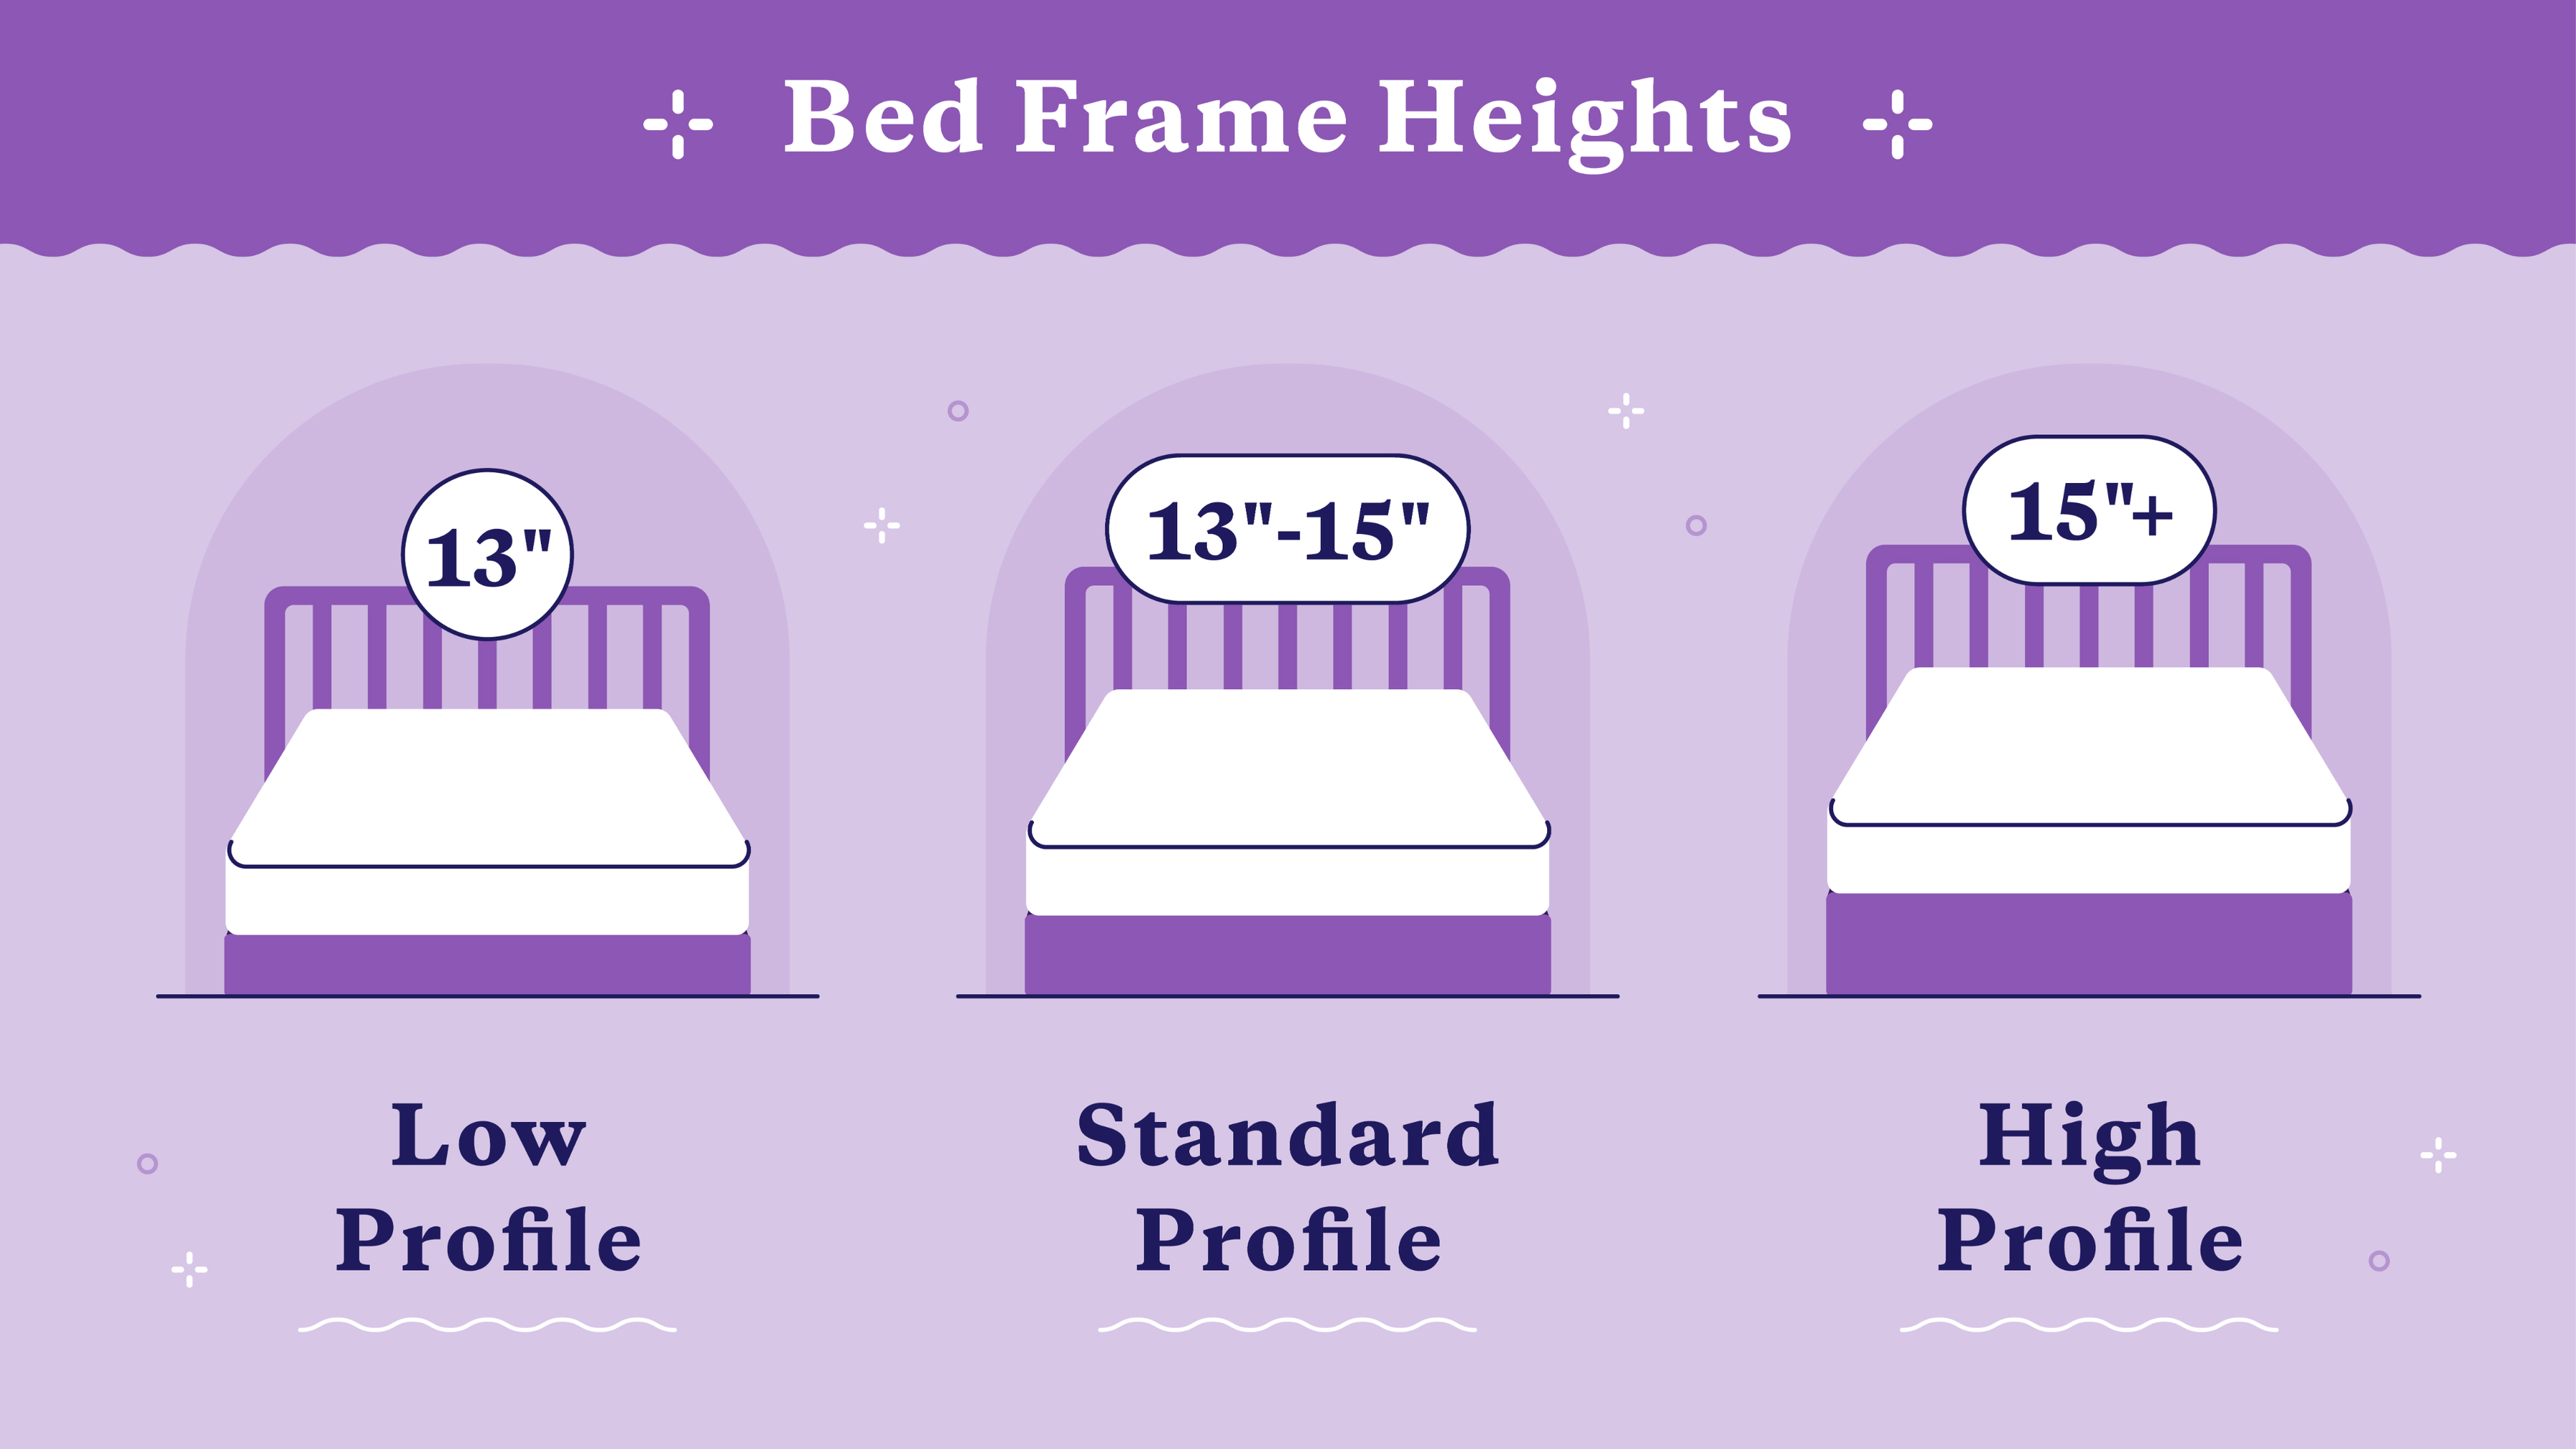 bed frames and average heights